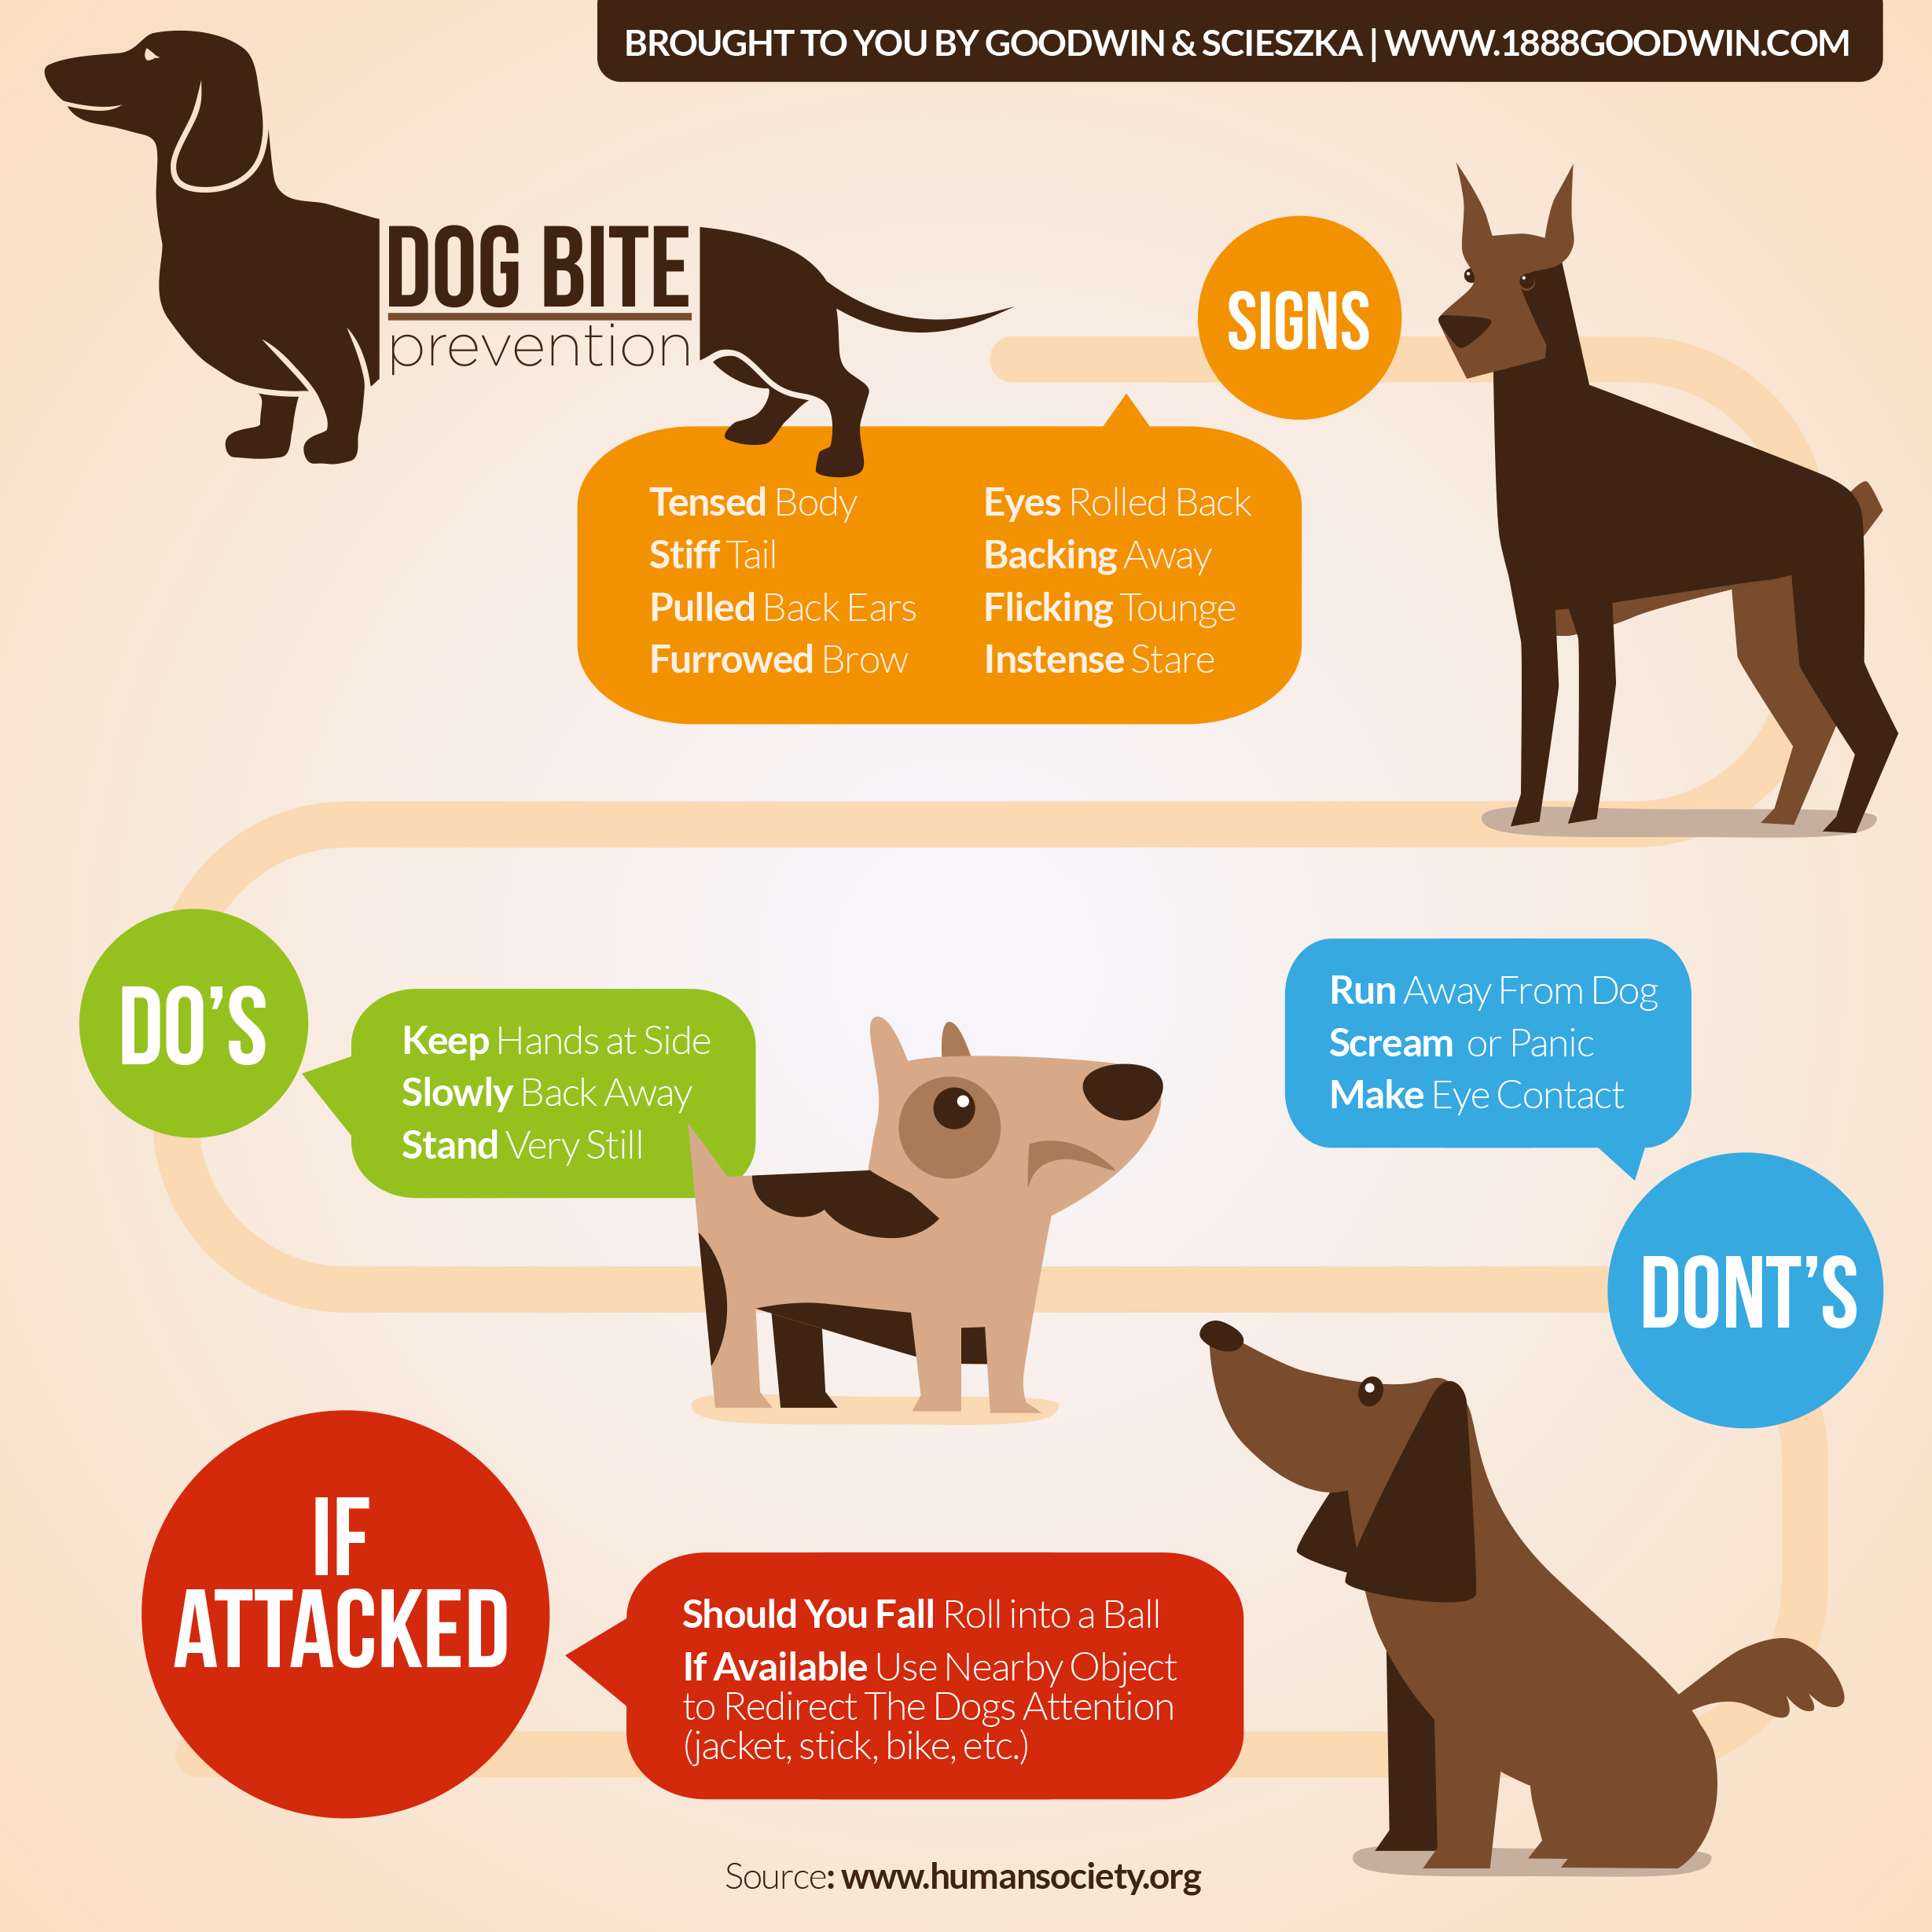 Do's and Don'ts to prevent a dog bite